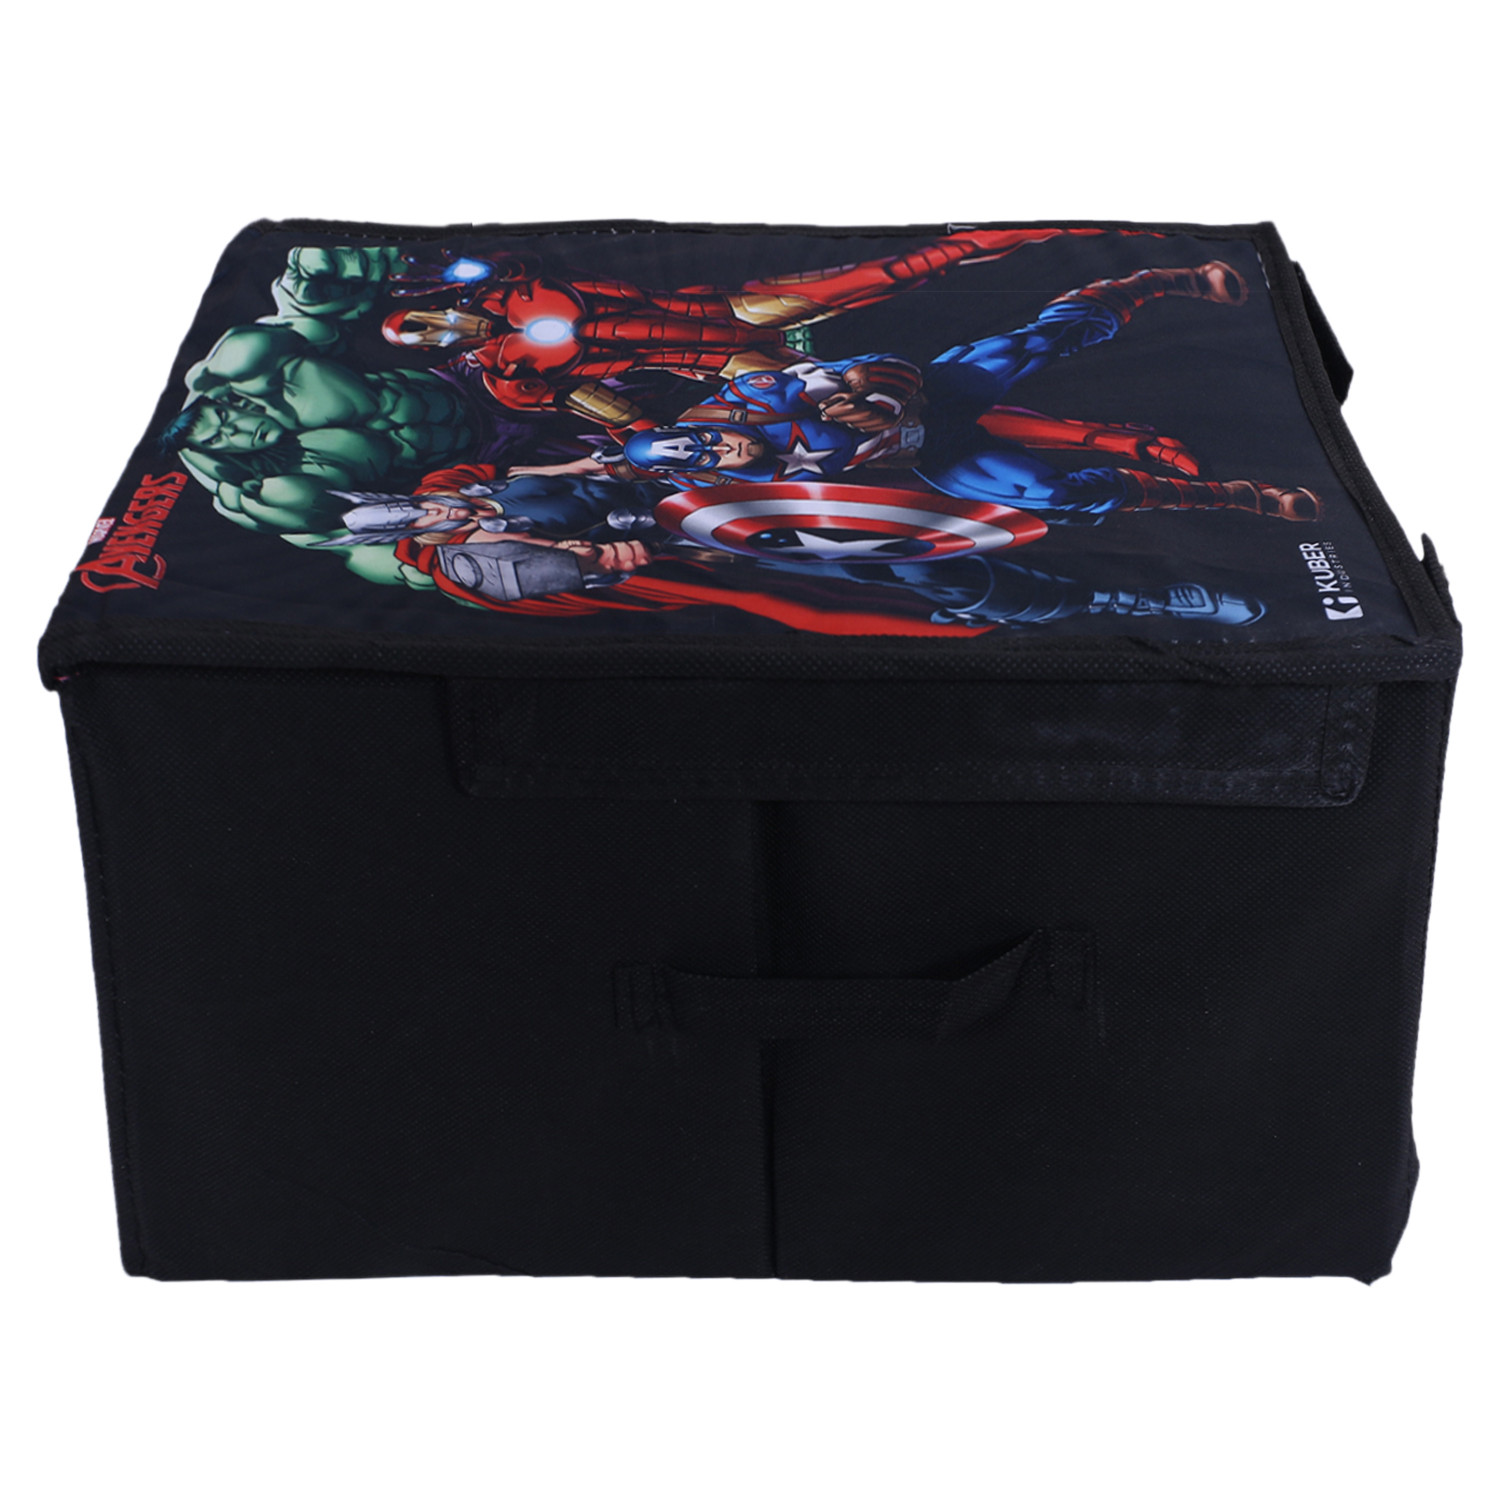 Kuber Industries Marvel Avengers Shirt Stacker|Wardrobe Organizer For Clothes|Non-Woven Wardrobe Organizer for Home With Lid (Black)